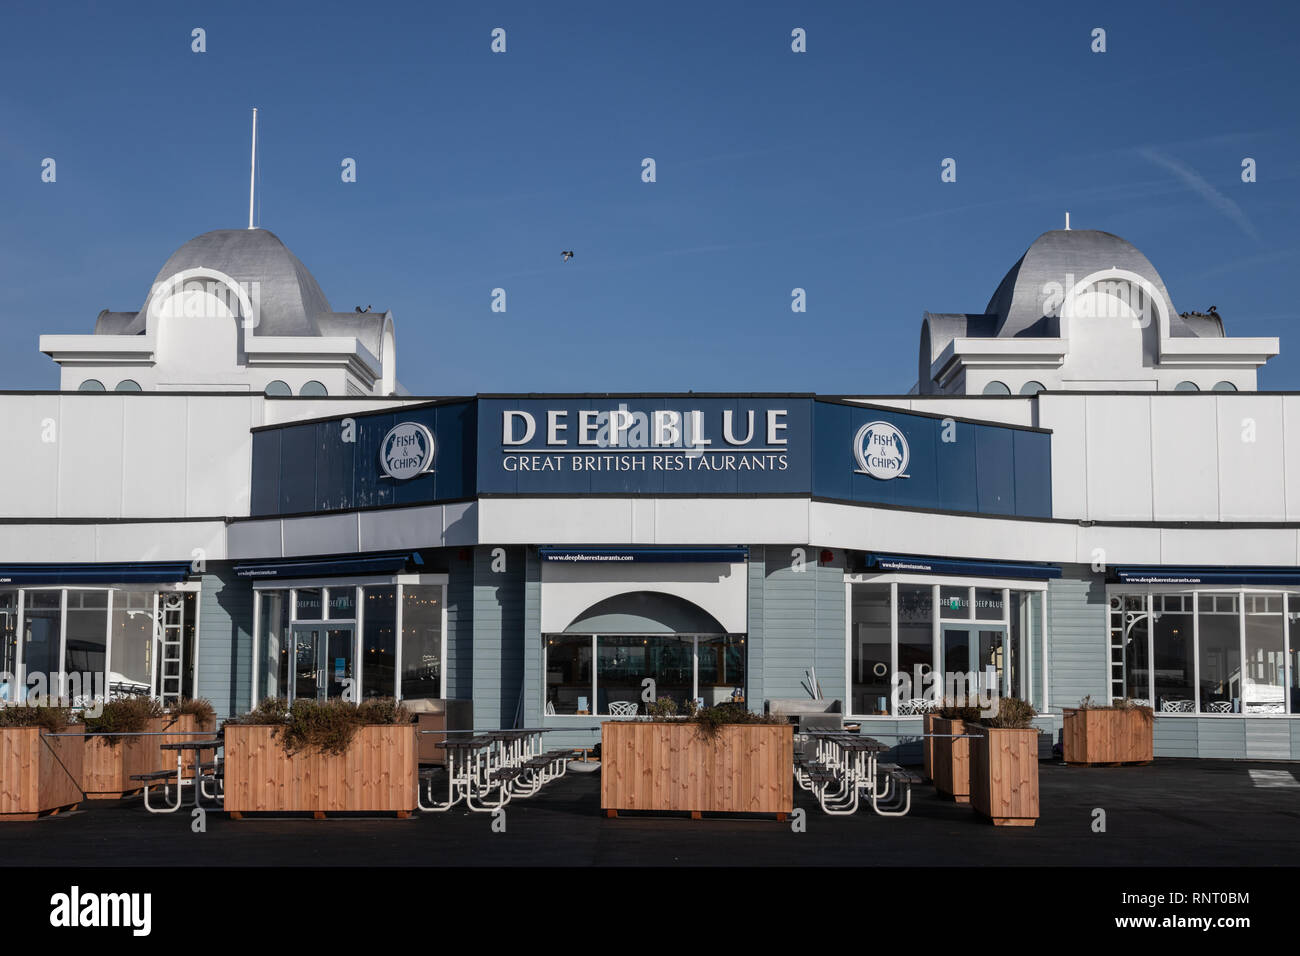 Deep blue fish and chips,South parade pier, Southsea, Portsmouth, UK Stock Photo